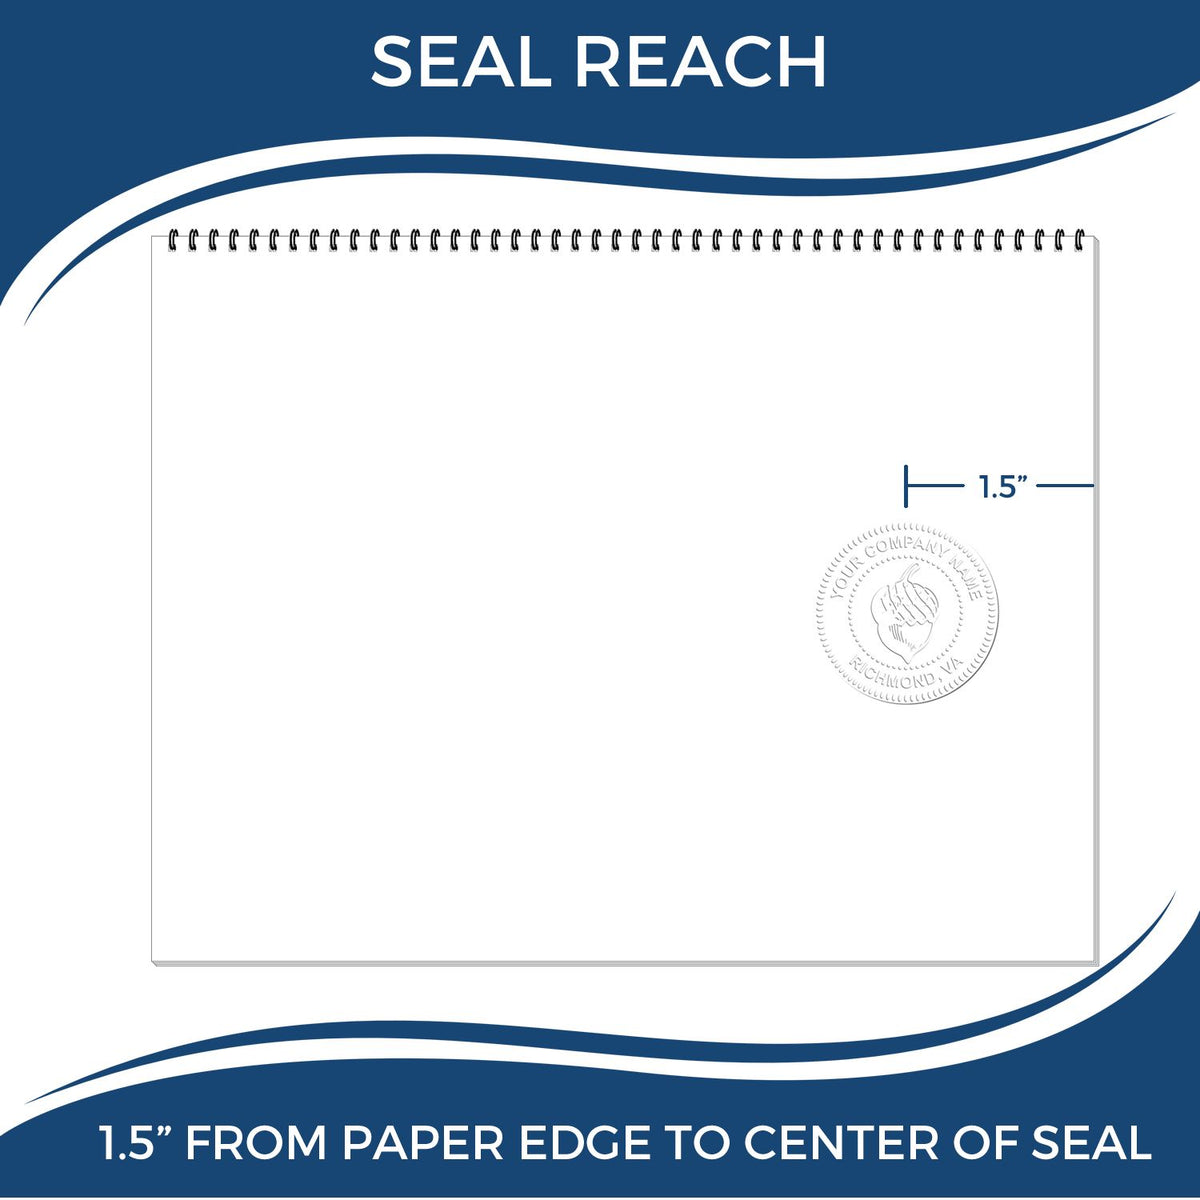 An infographic showing the seal reach which is represented by a ruler and a miniature seal image of the Handheld Wisconsin Professional Geologist Embosser